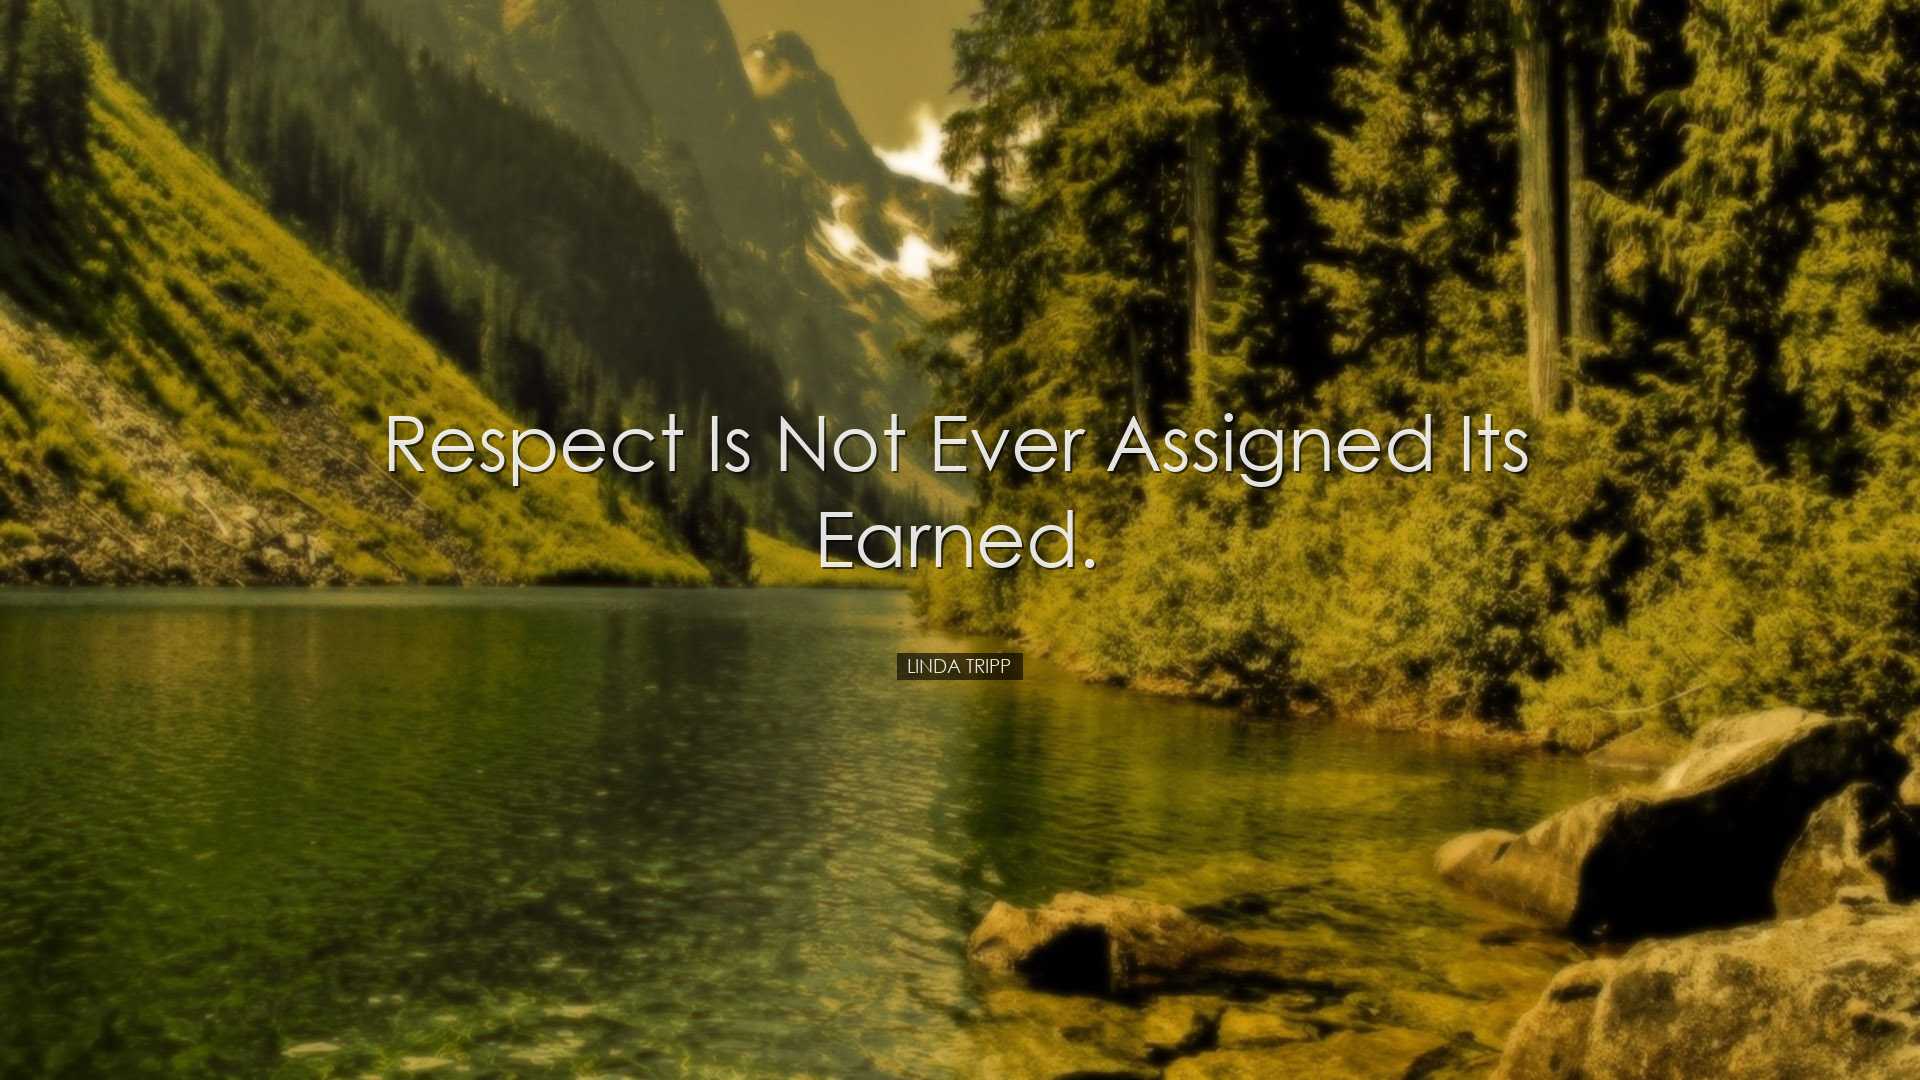 Respect is not ever assigned its earned. - Linda Tripp